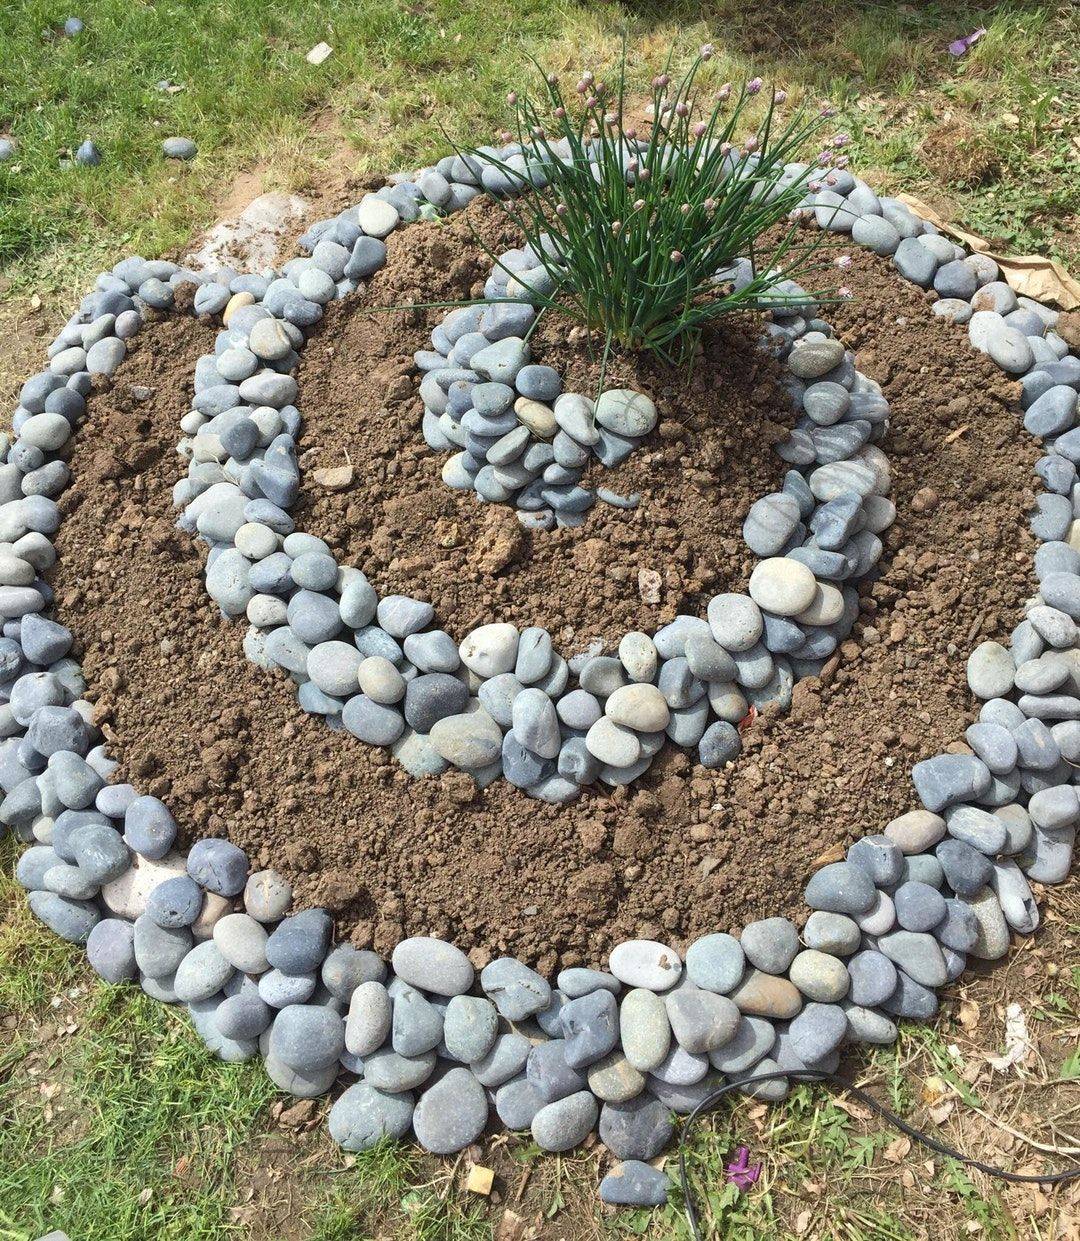 The Herb Spiral